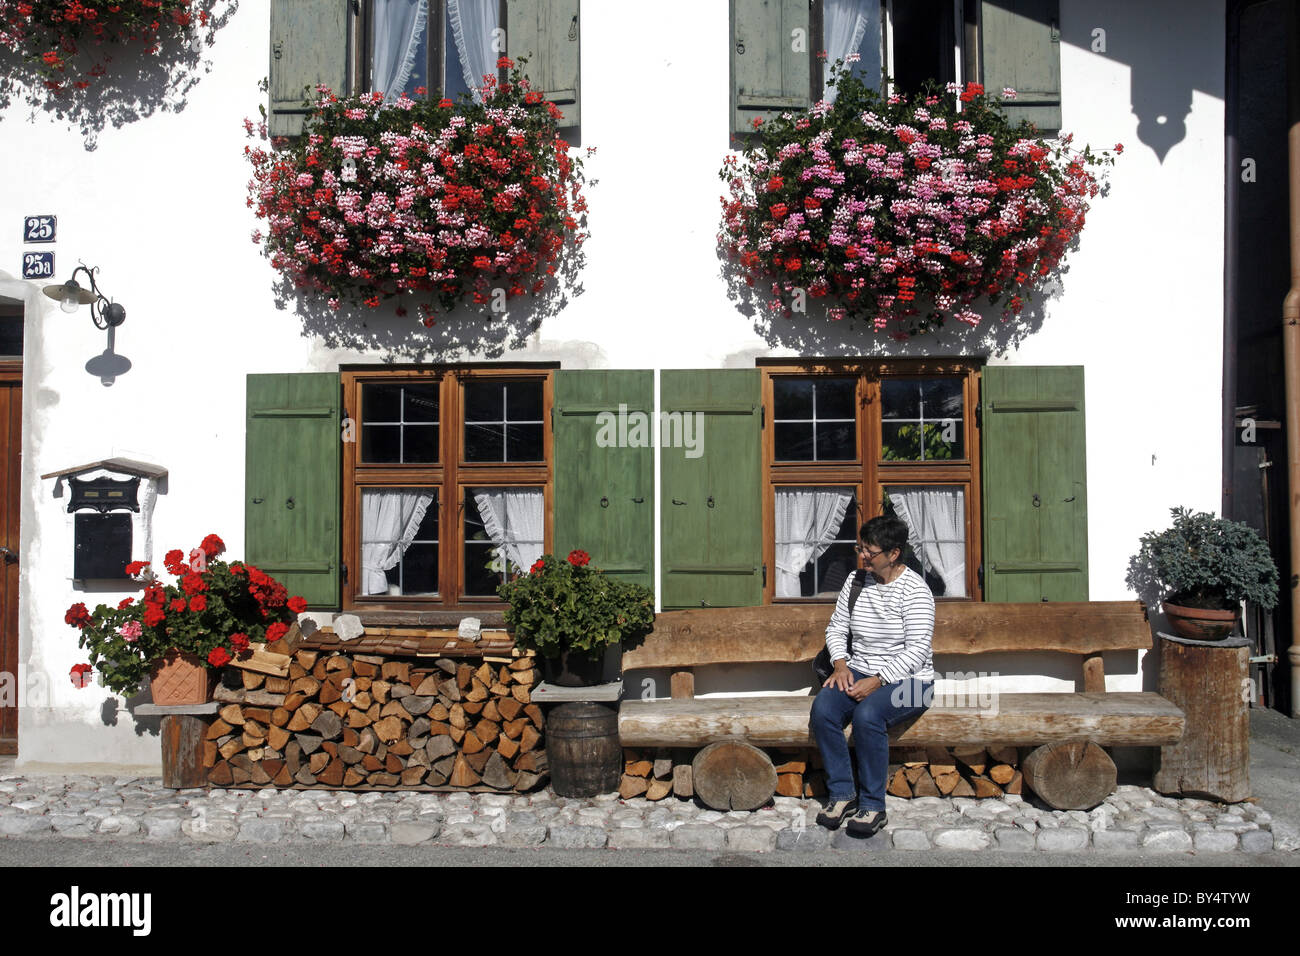 Germany Bavaria Garmisch-Partenkirchen Fruhling Strasse decorated bavarian buildings with balconies and flowers architecture Stock Photo